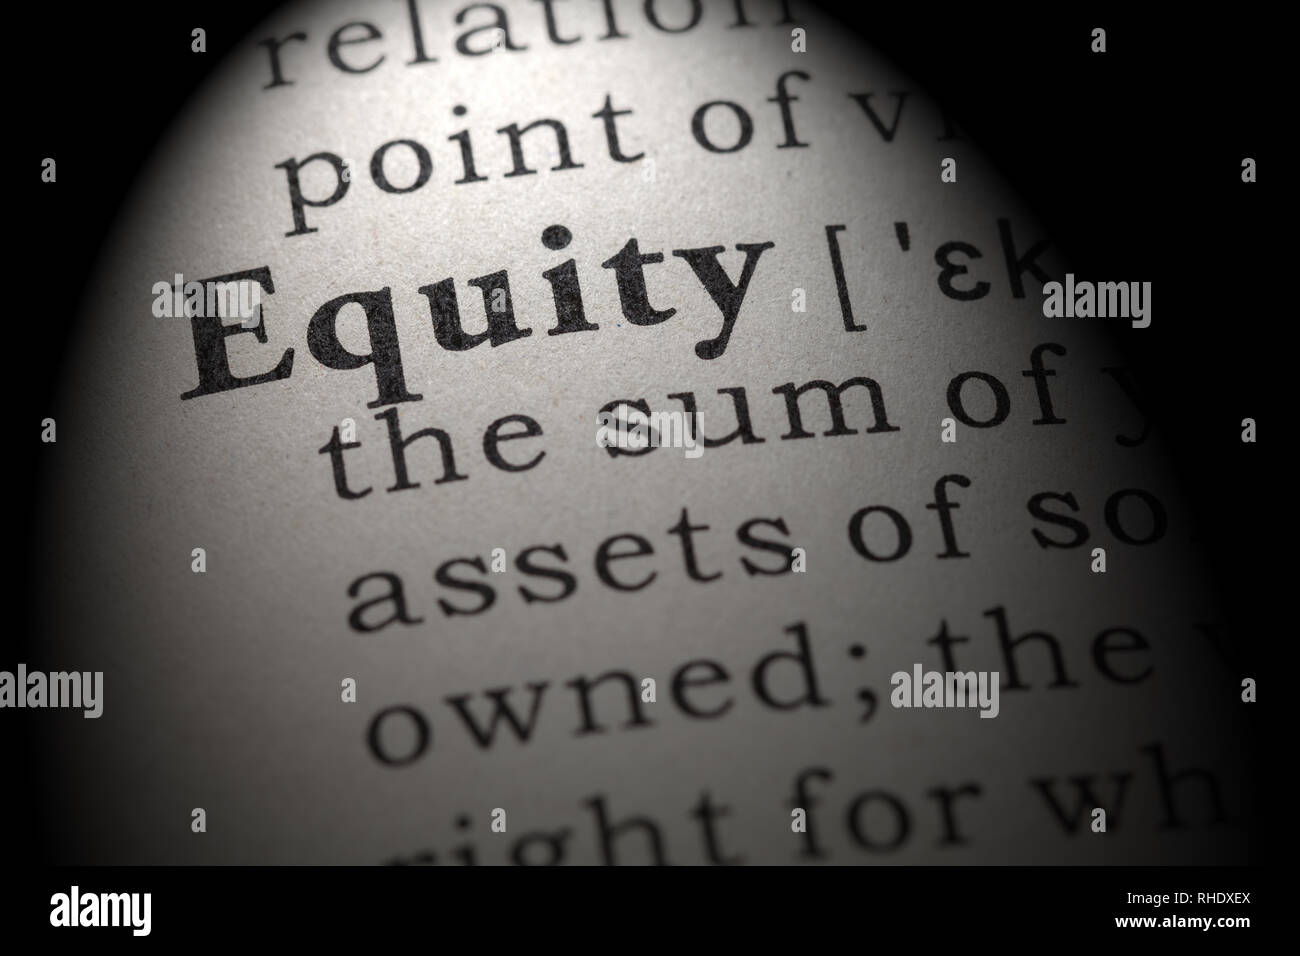 Fake Dictionary, Dictionary definition of the word equity. including key descriptive words. Stock Photo